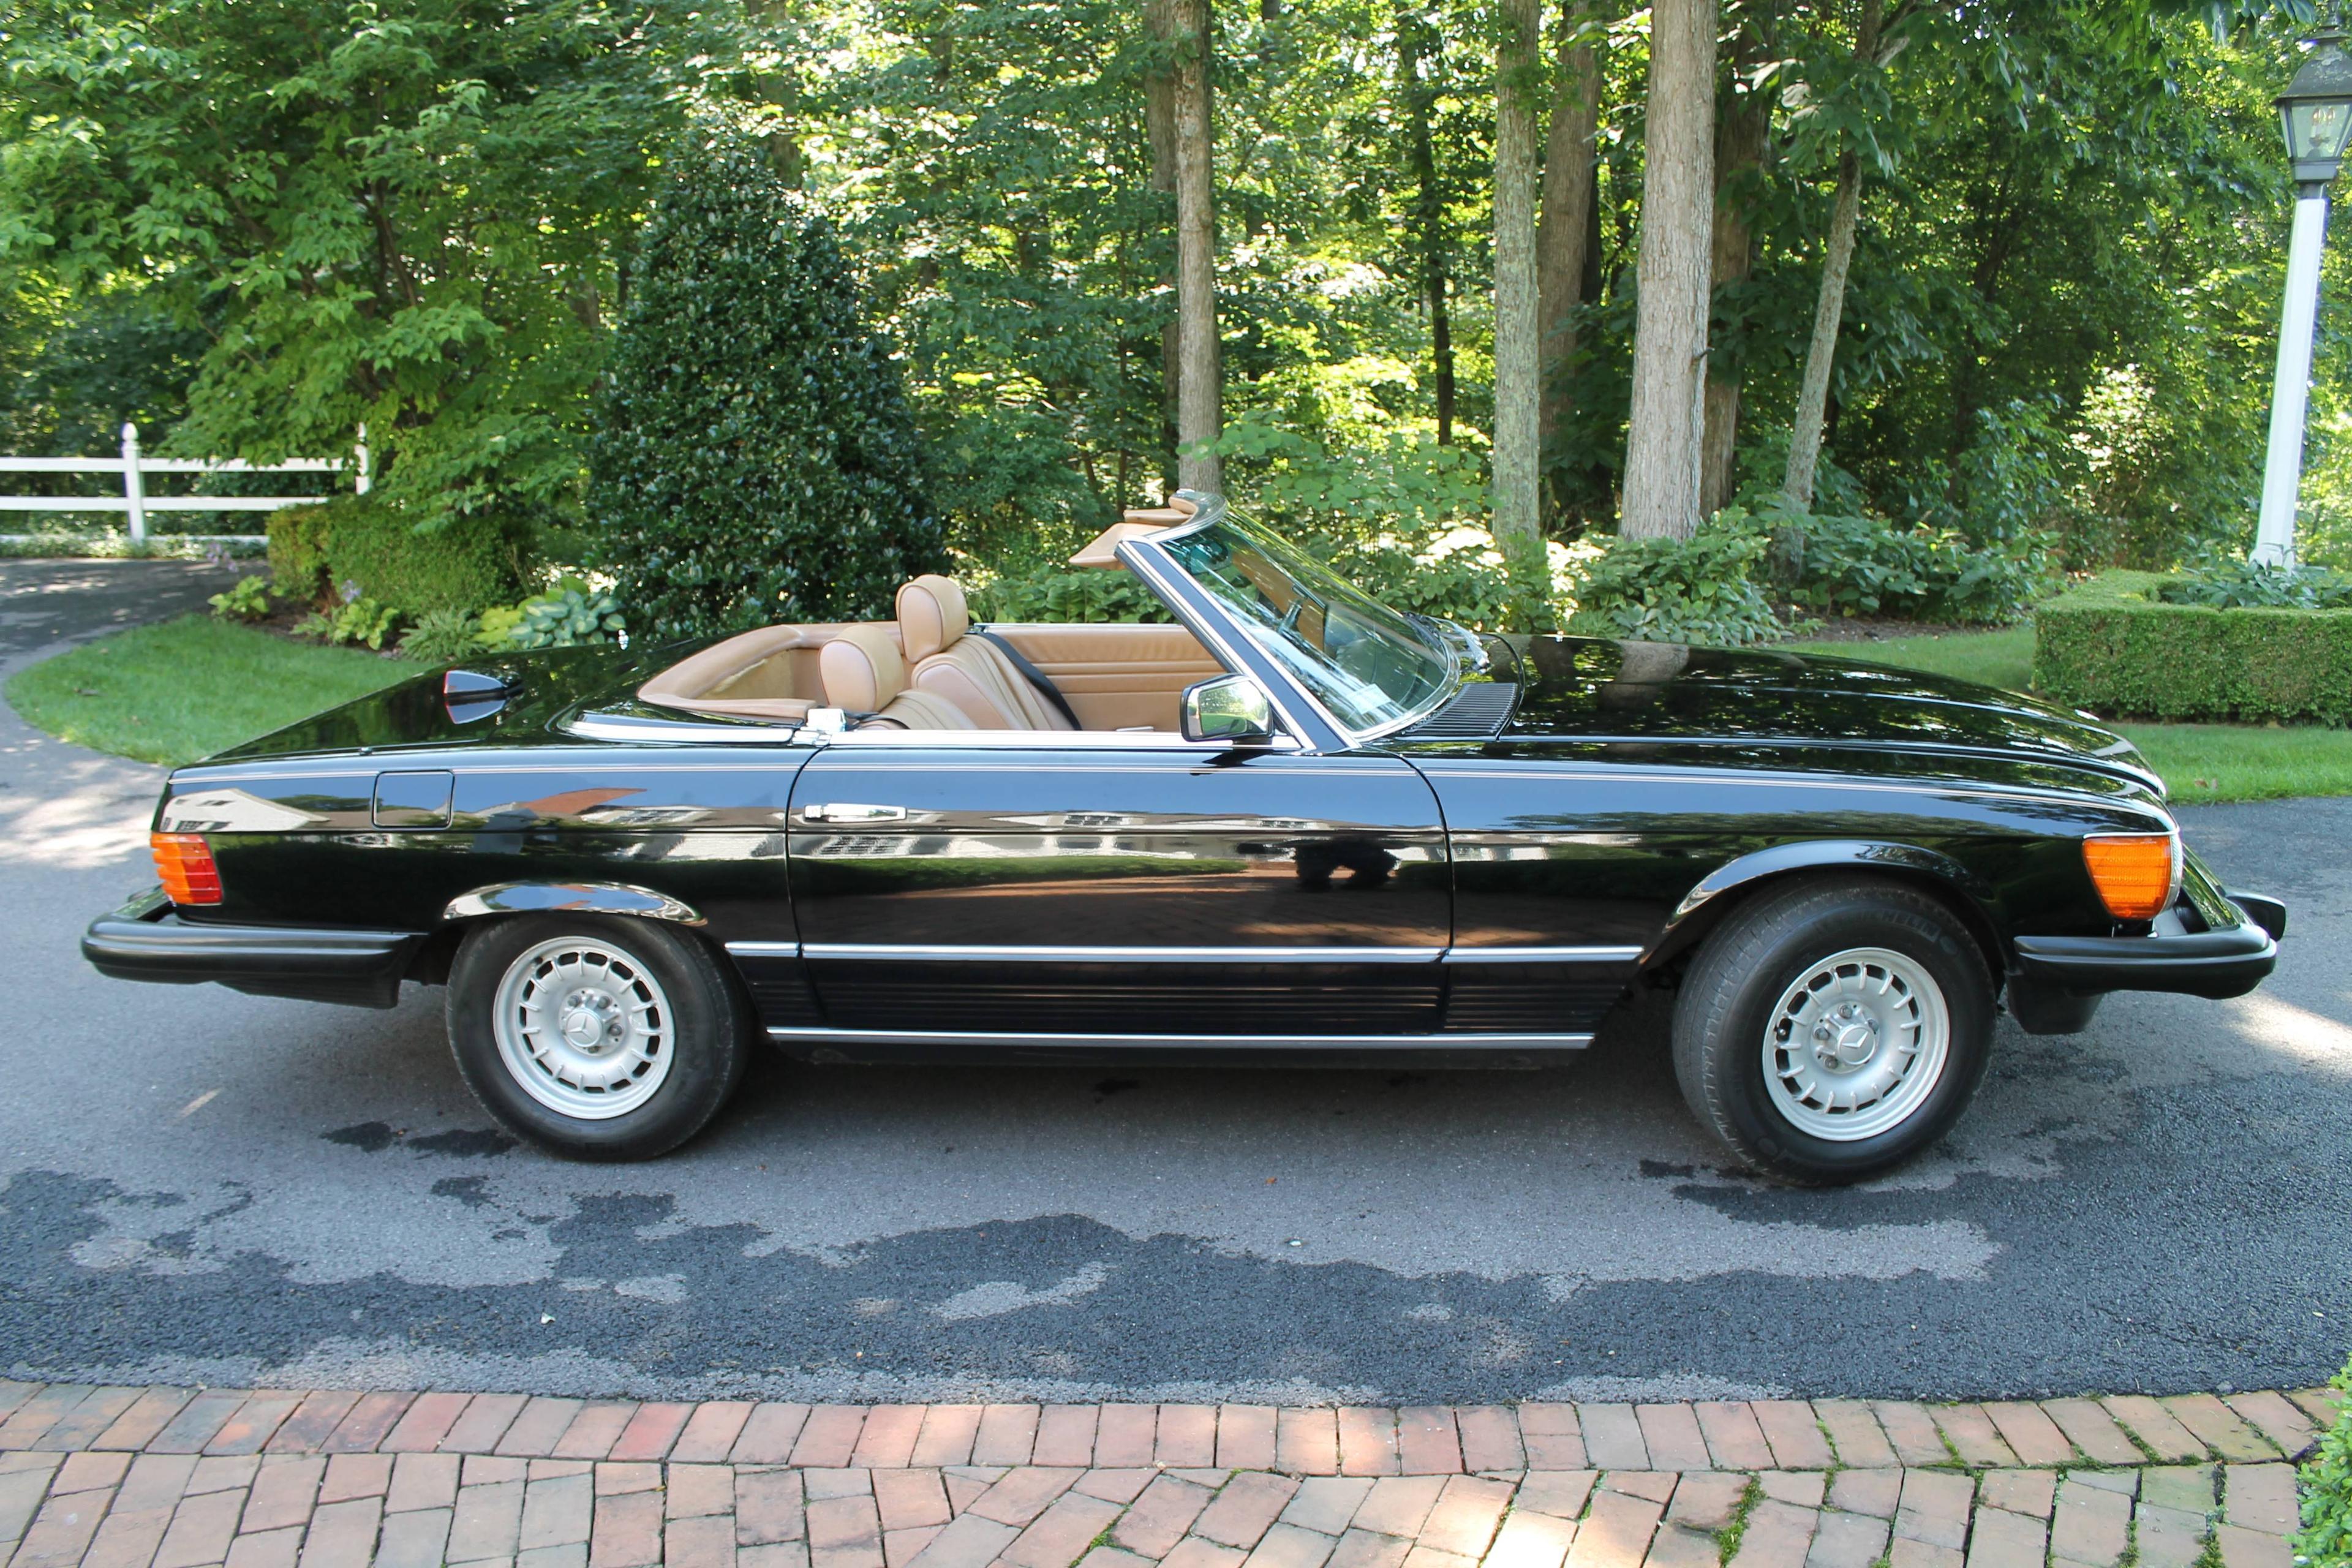 1983 Mercedes-Benz 380 SL Convertible. 83,000 actual miles as stated on tit